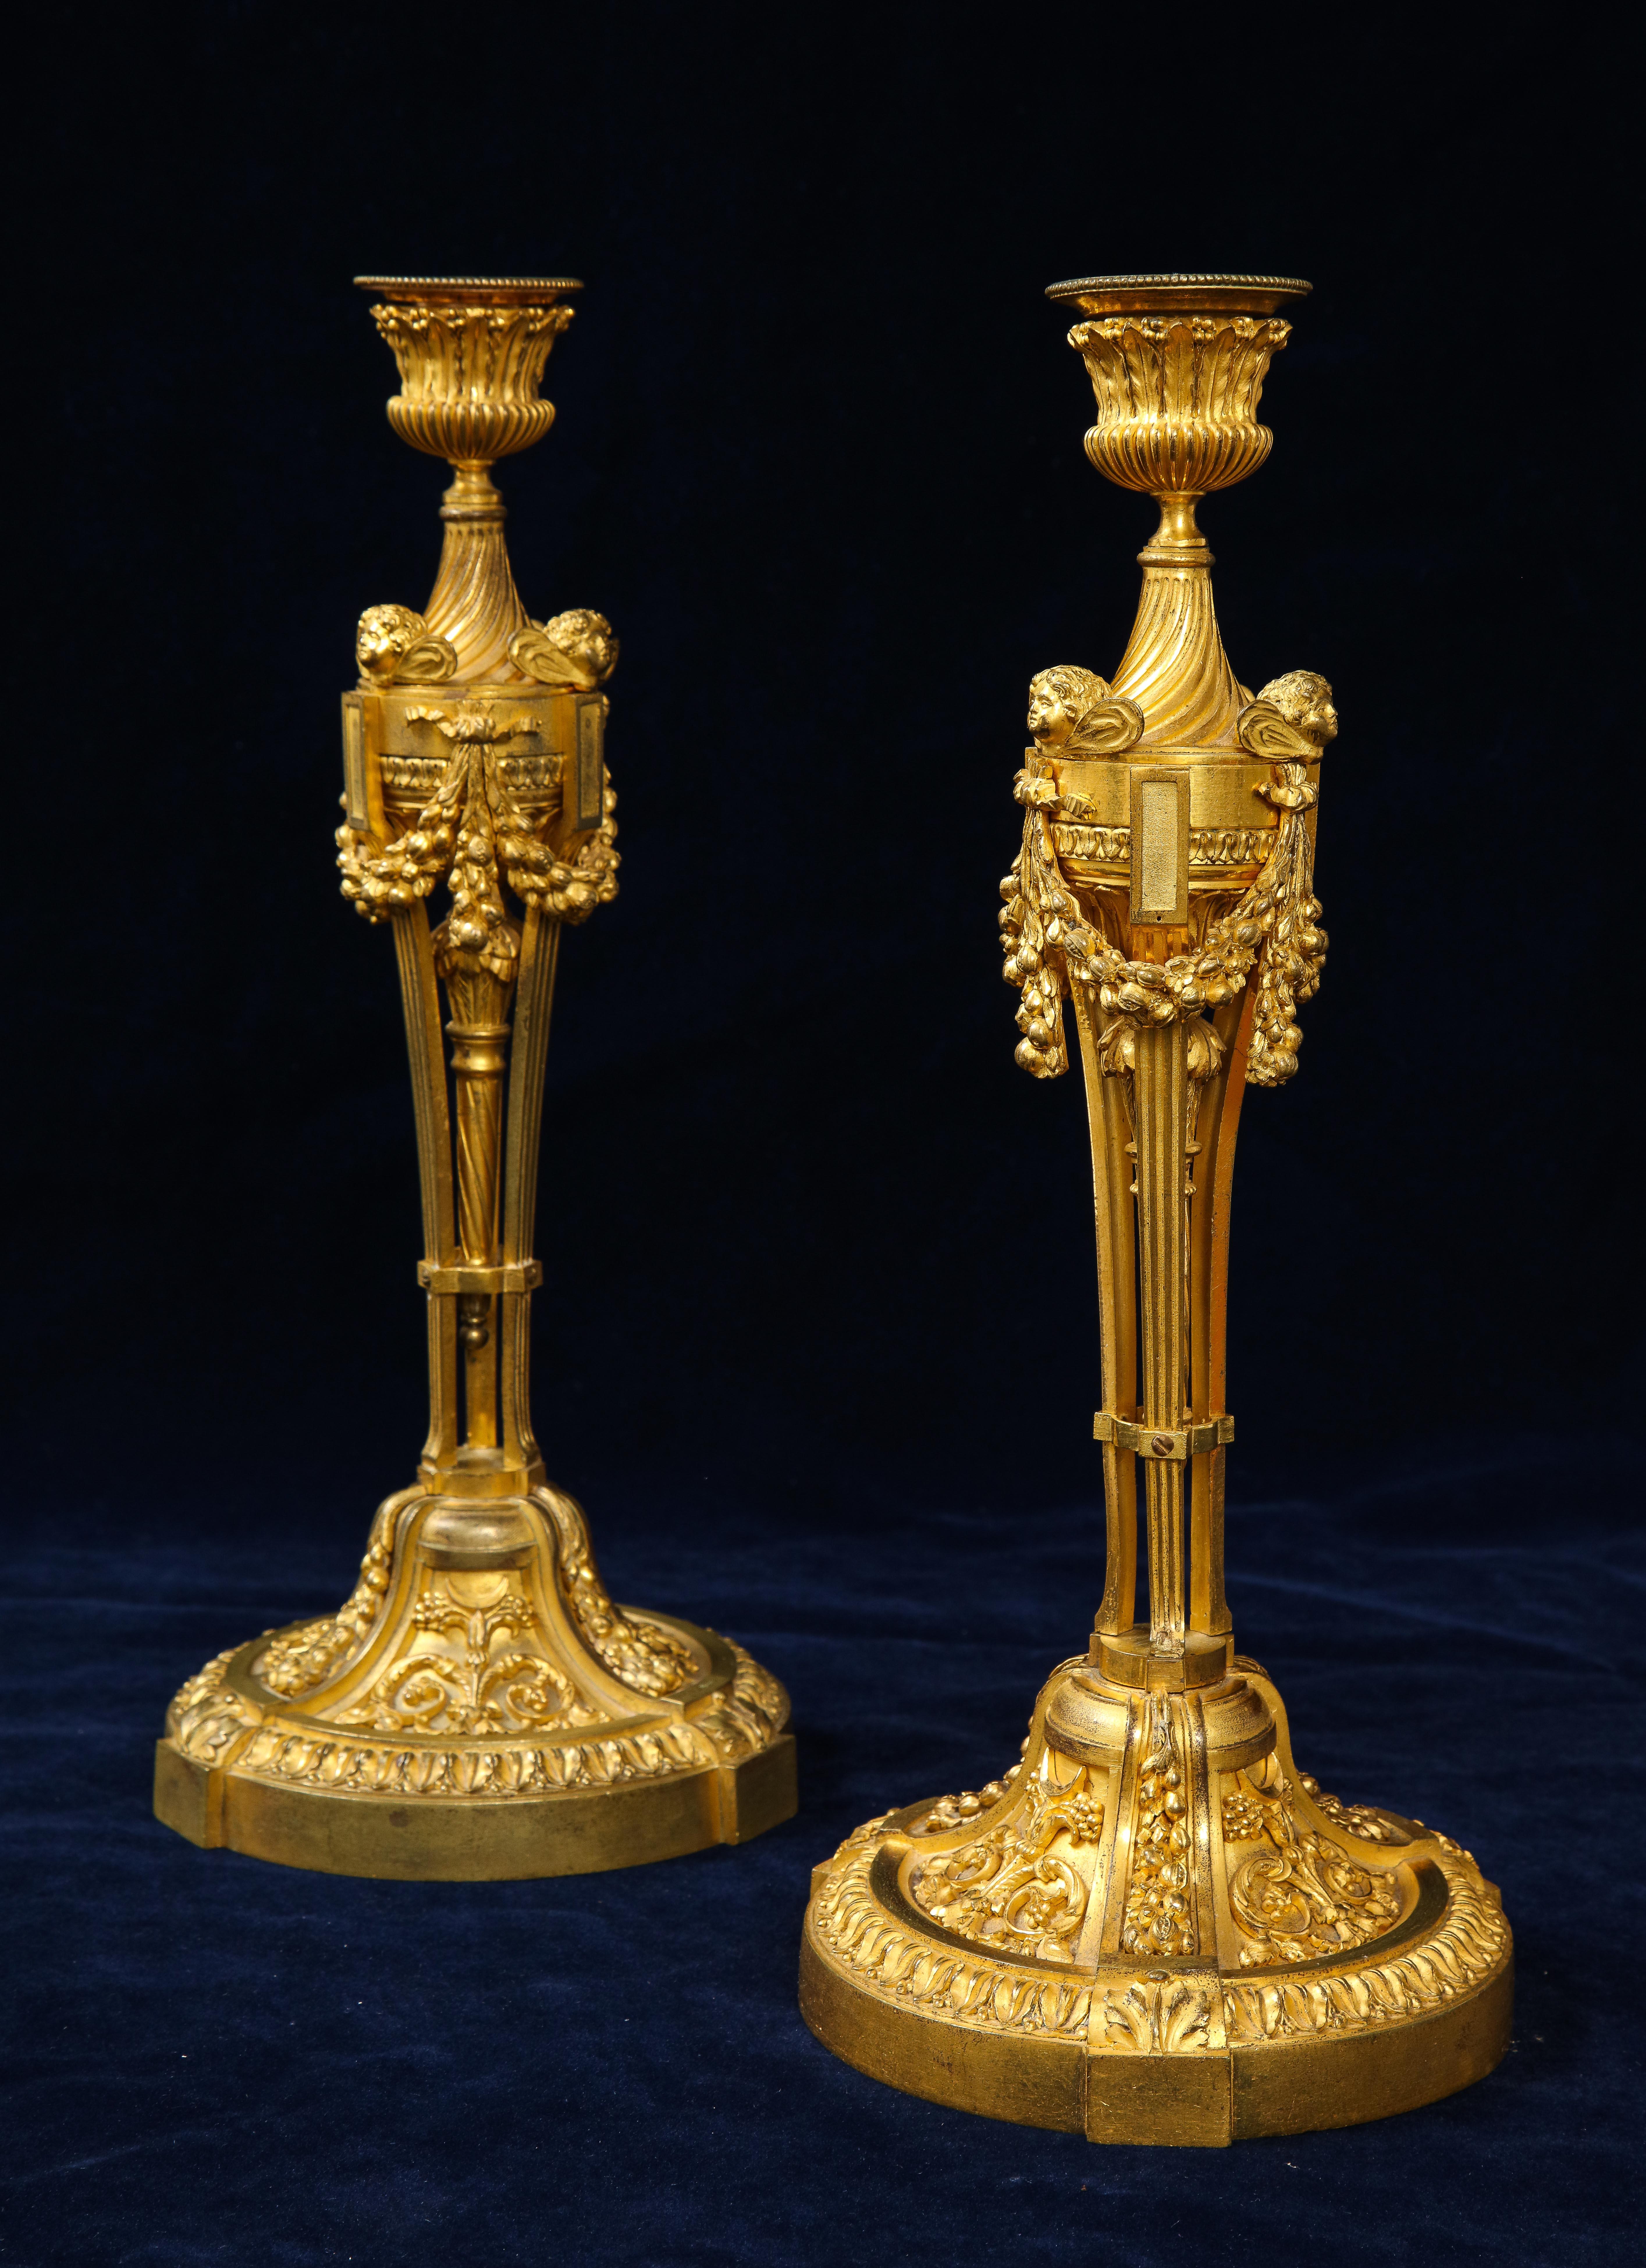 Gilt Pair of French Louid xvi Ormolu Candlesticks with Putti Masks and Garlands For Sale